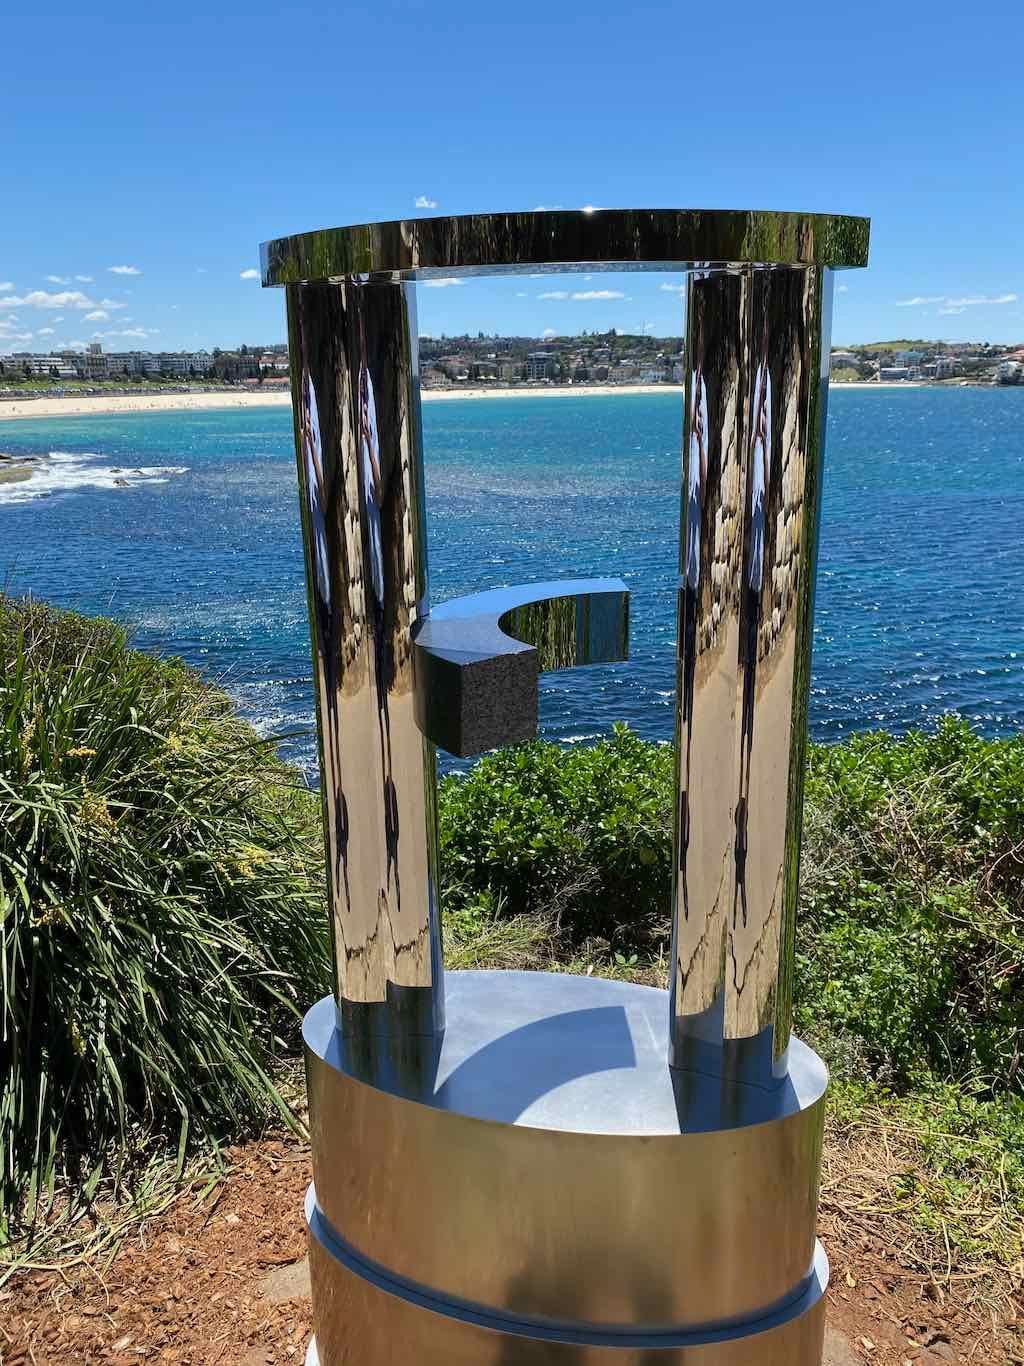 2022 Public Day Tour Sculptures by The Sea Image -6361cfea8ee5f